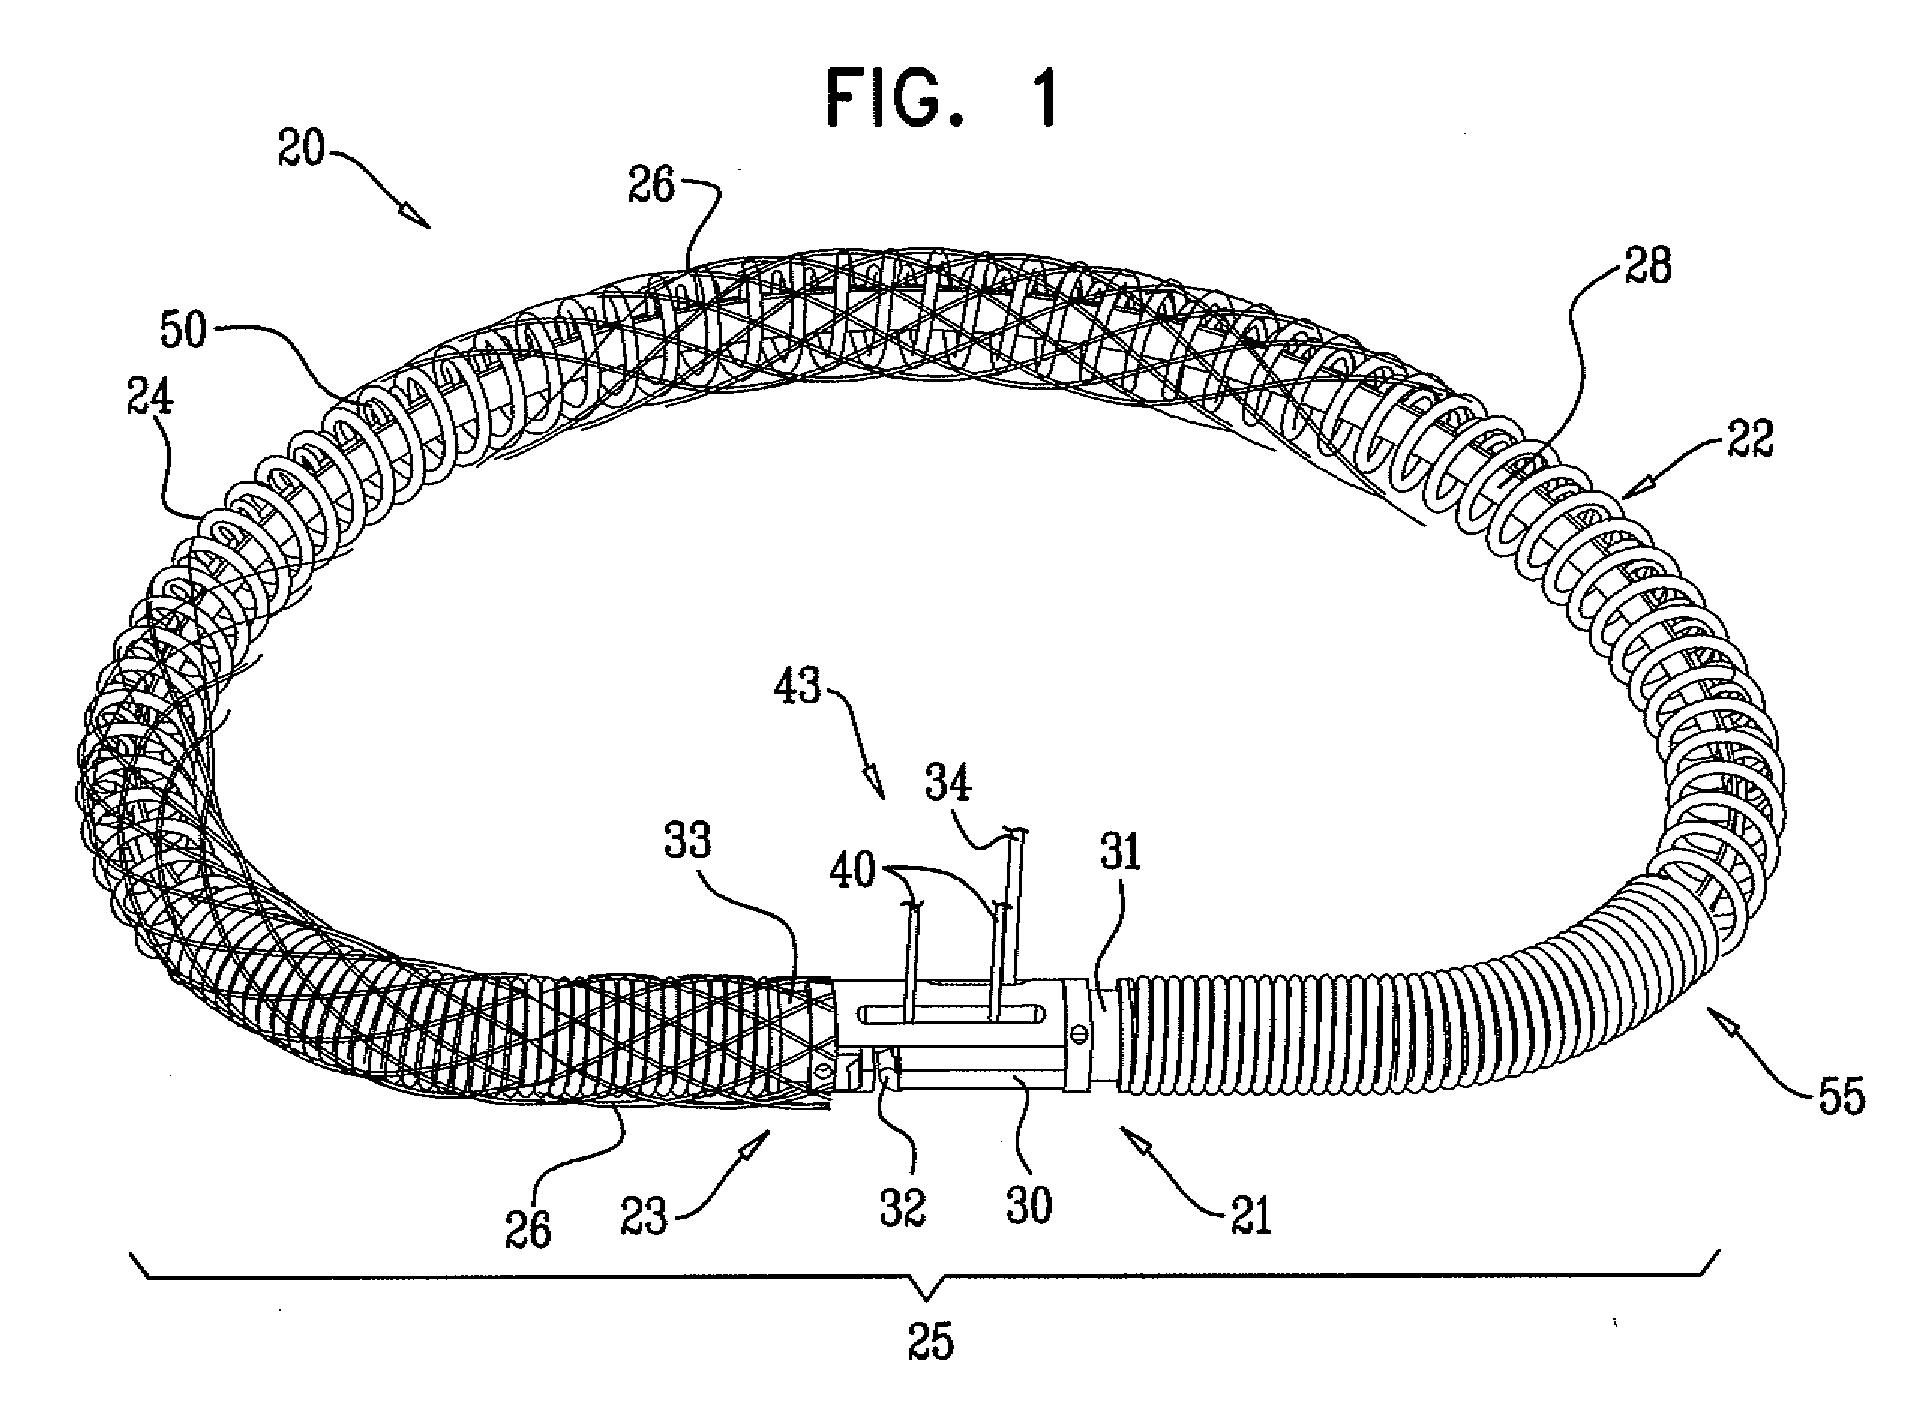 Actively-engageable movement-restriction mechanism for use with an annuloplasty structure